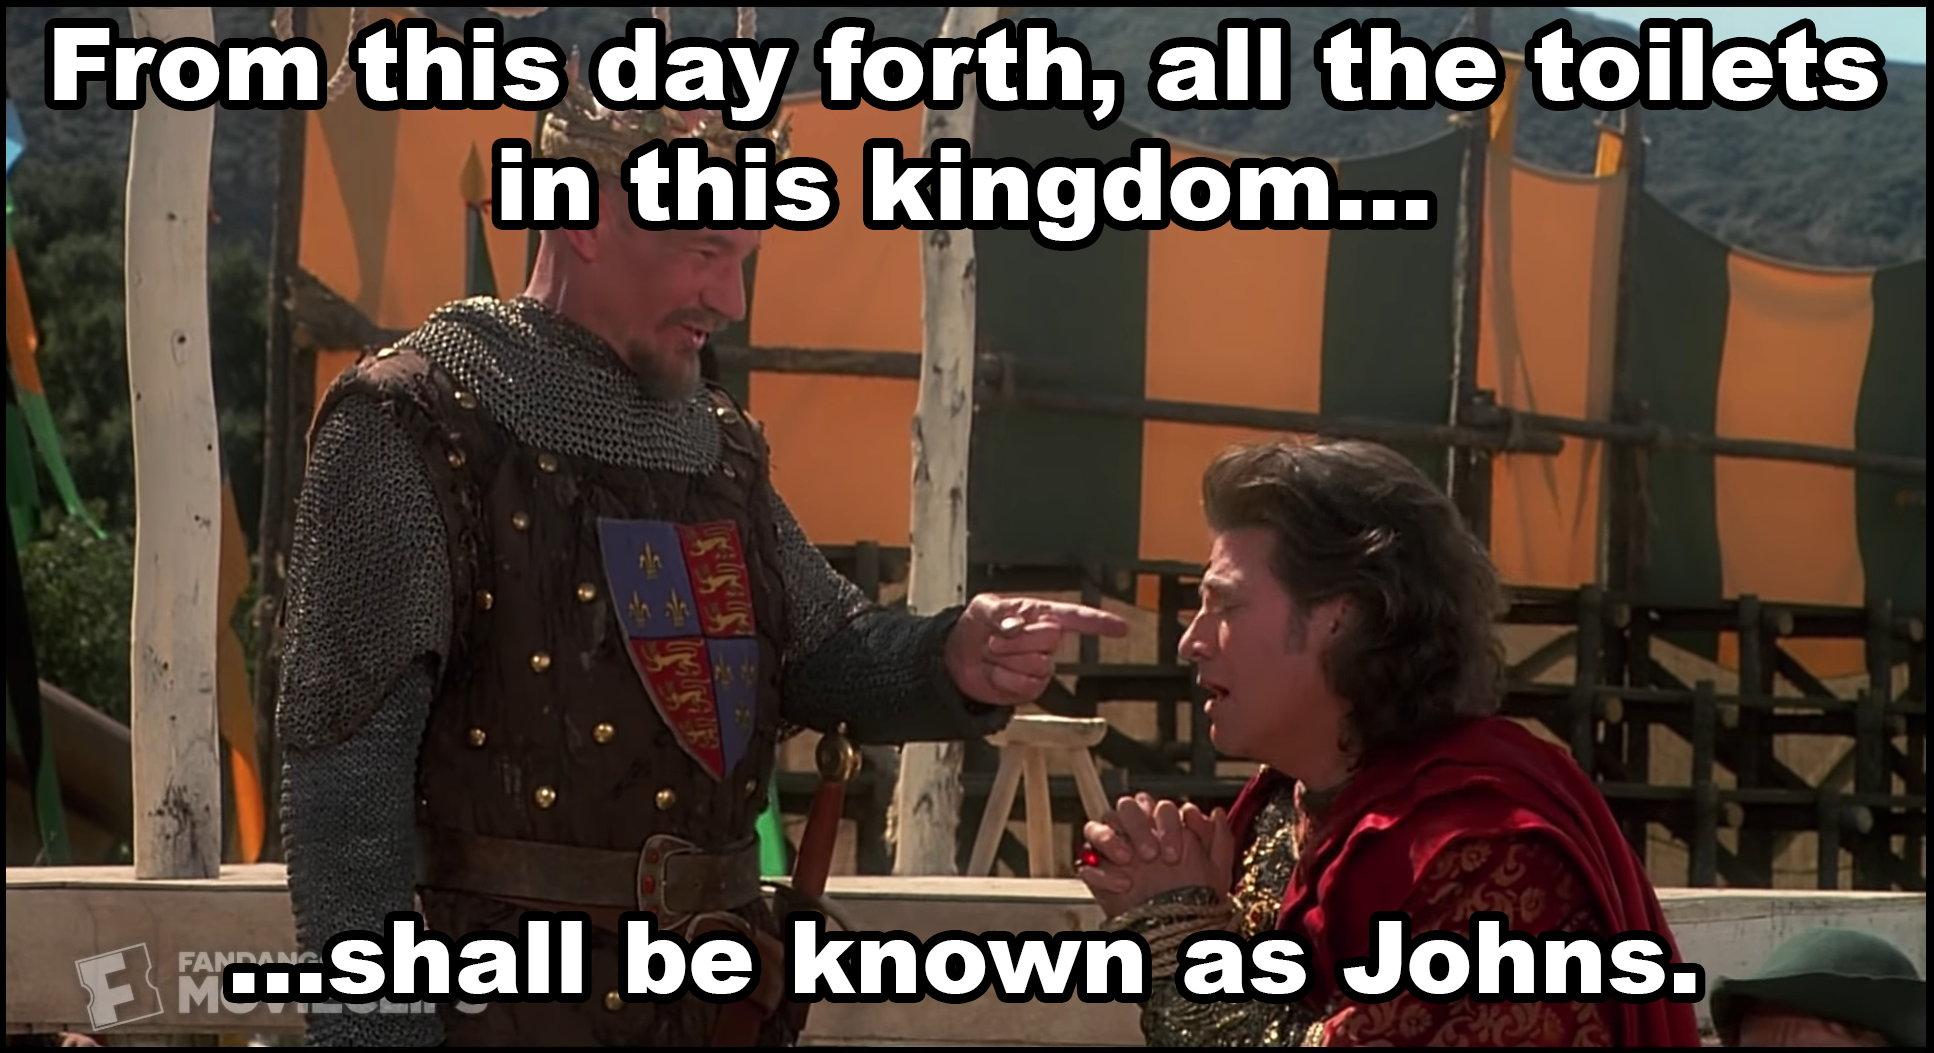 King Richard in Robin Hood Men in Tights to Prince John: From this day forth, all the toilets in this kingdom shall be known as Johns.